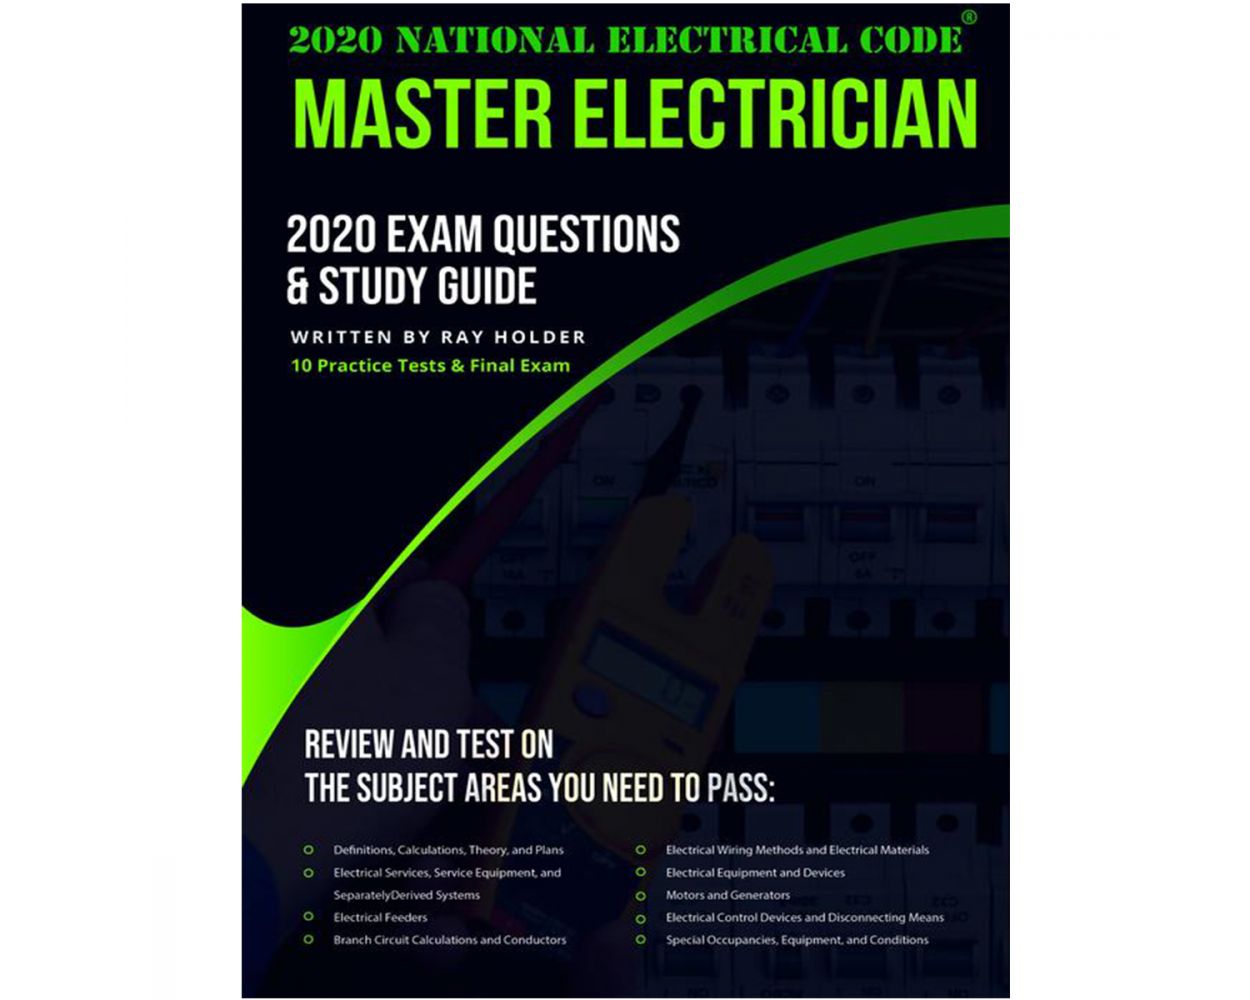 Electrical test technical guides